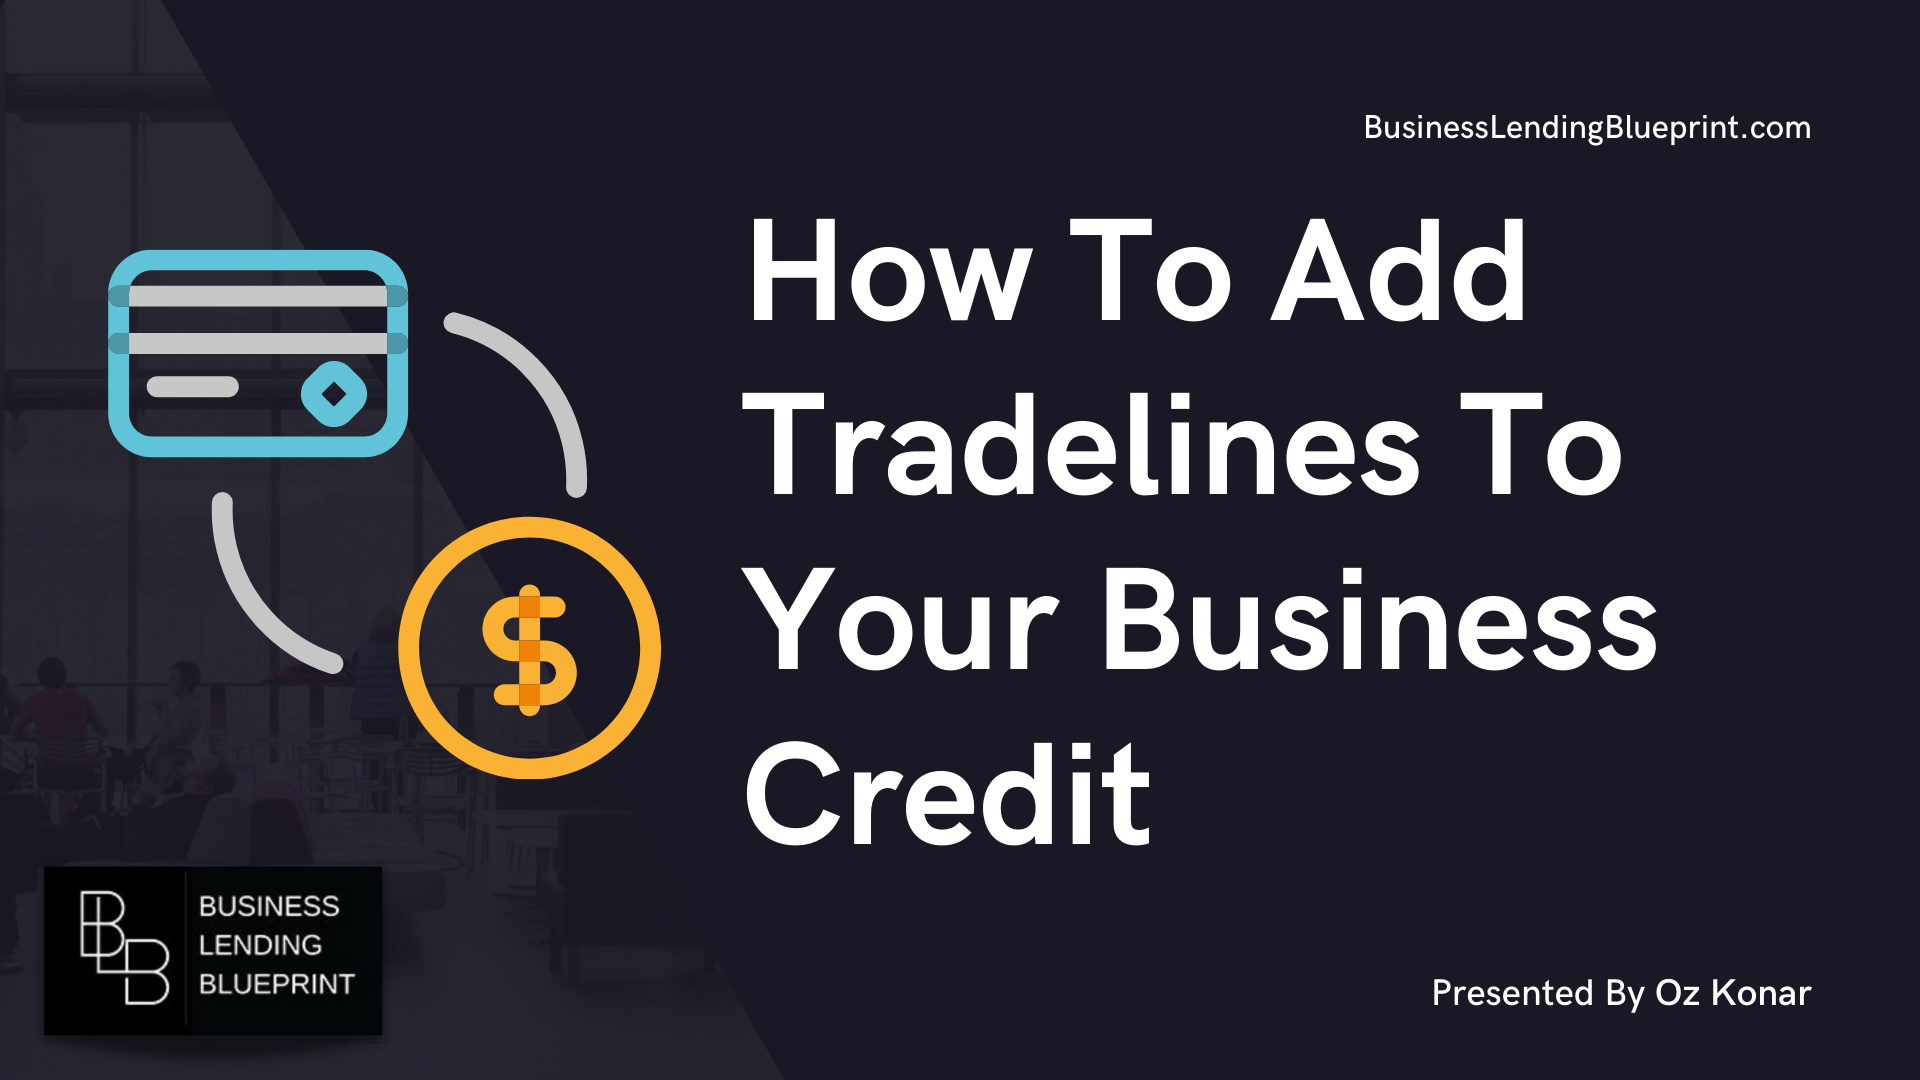 Add Tradelines To Business Credit